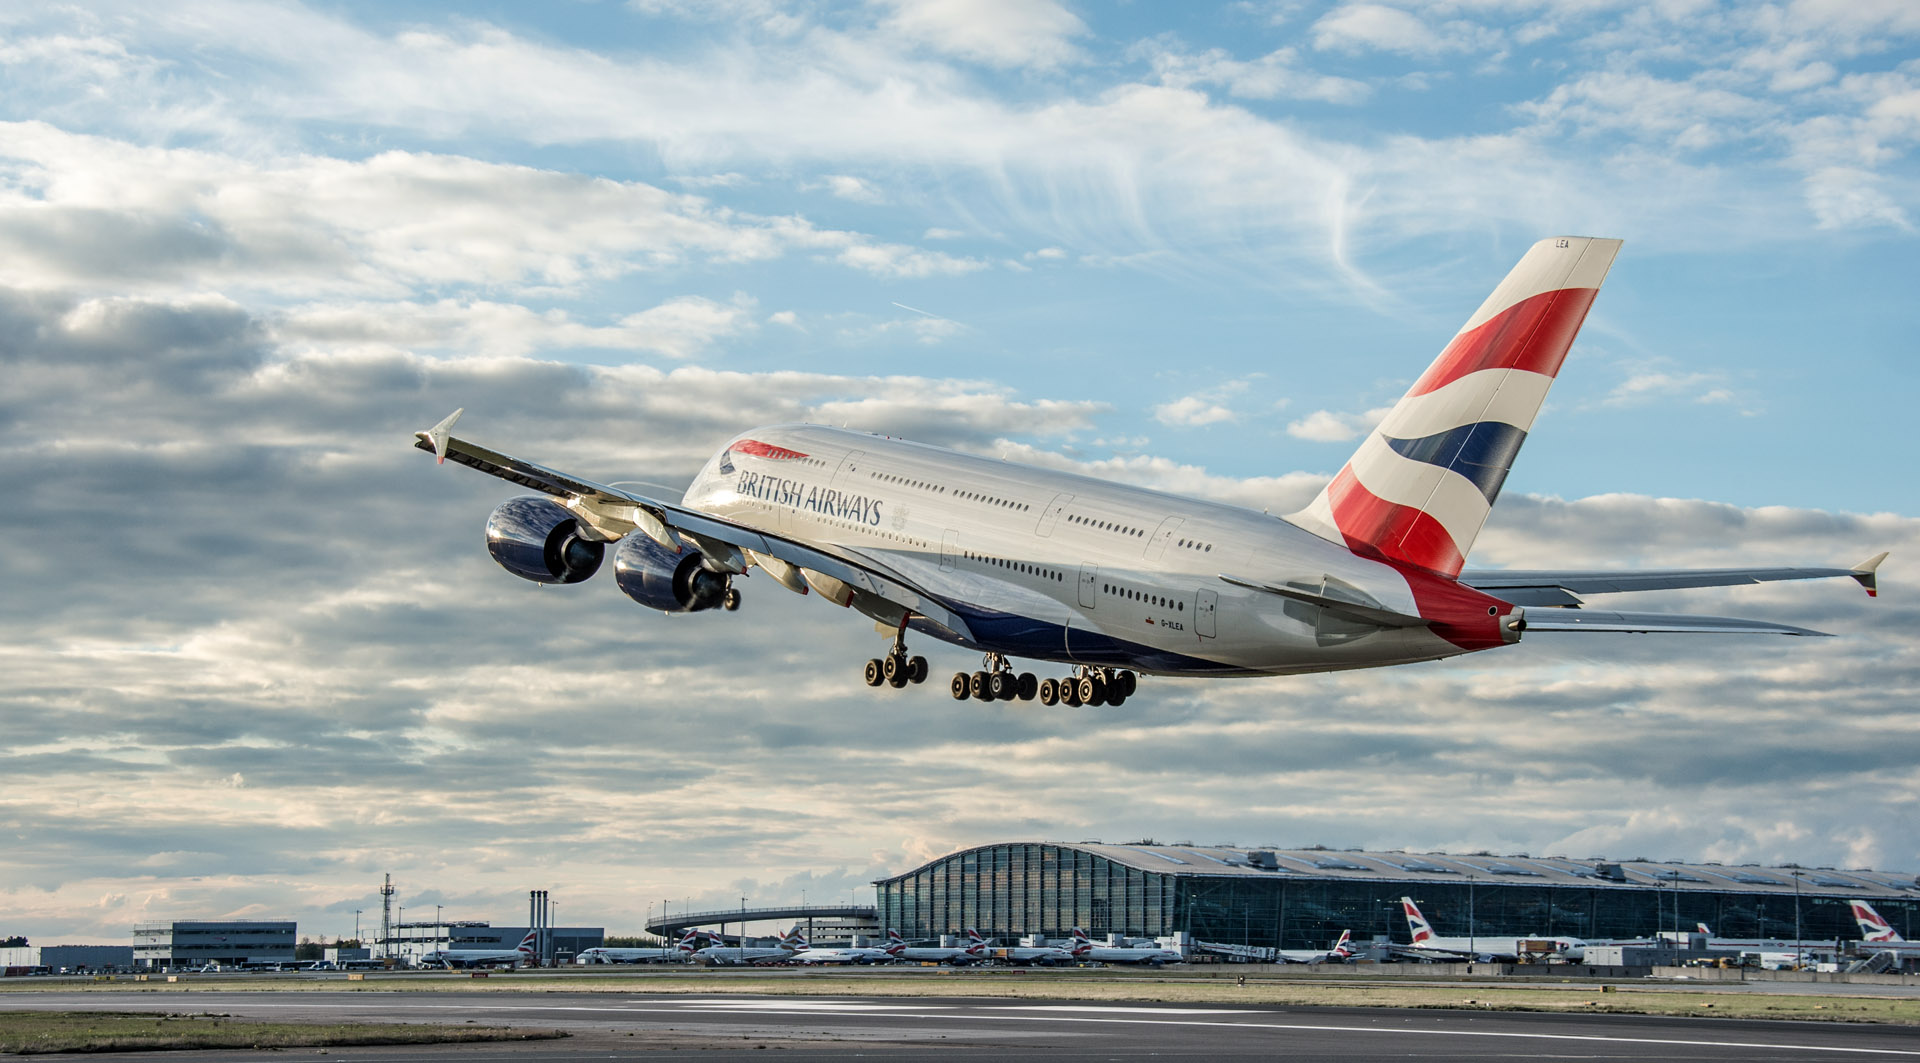 The decade to make a difference: sustainability at Heathrow Airport